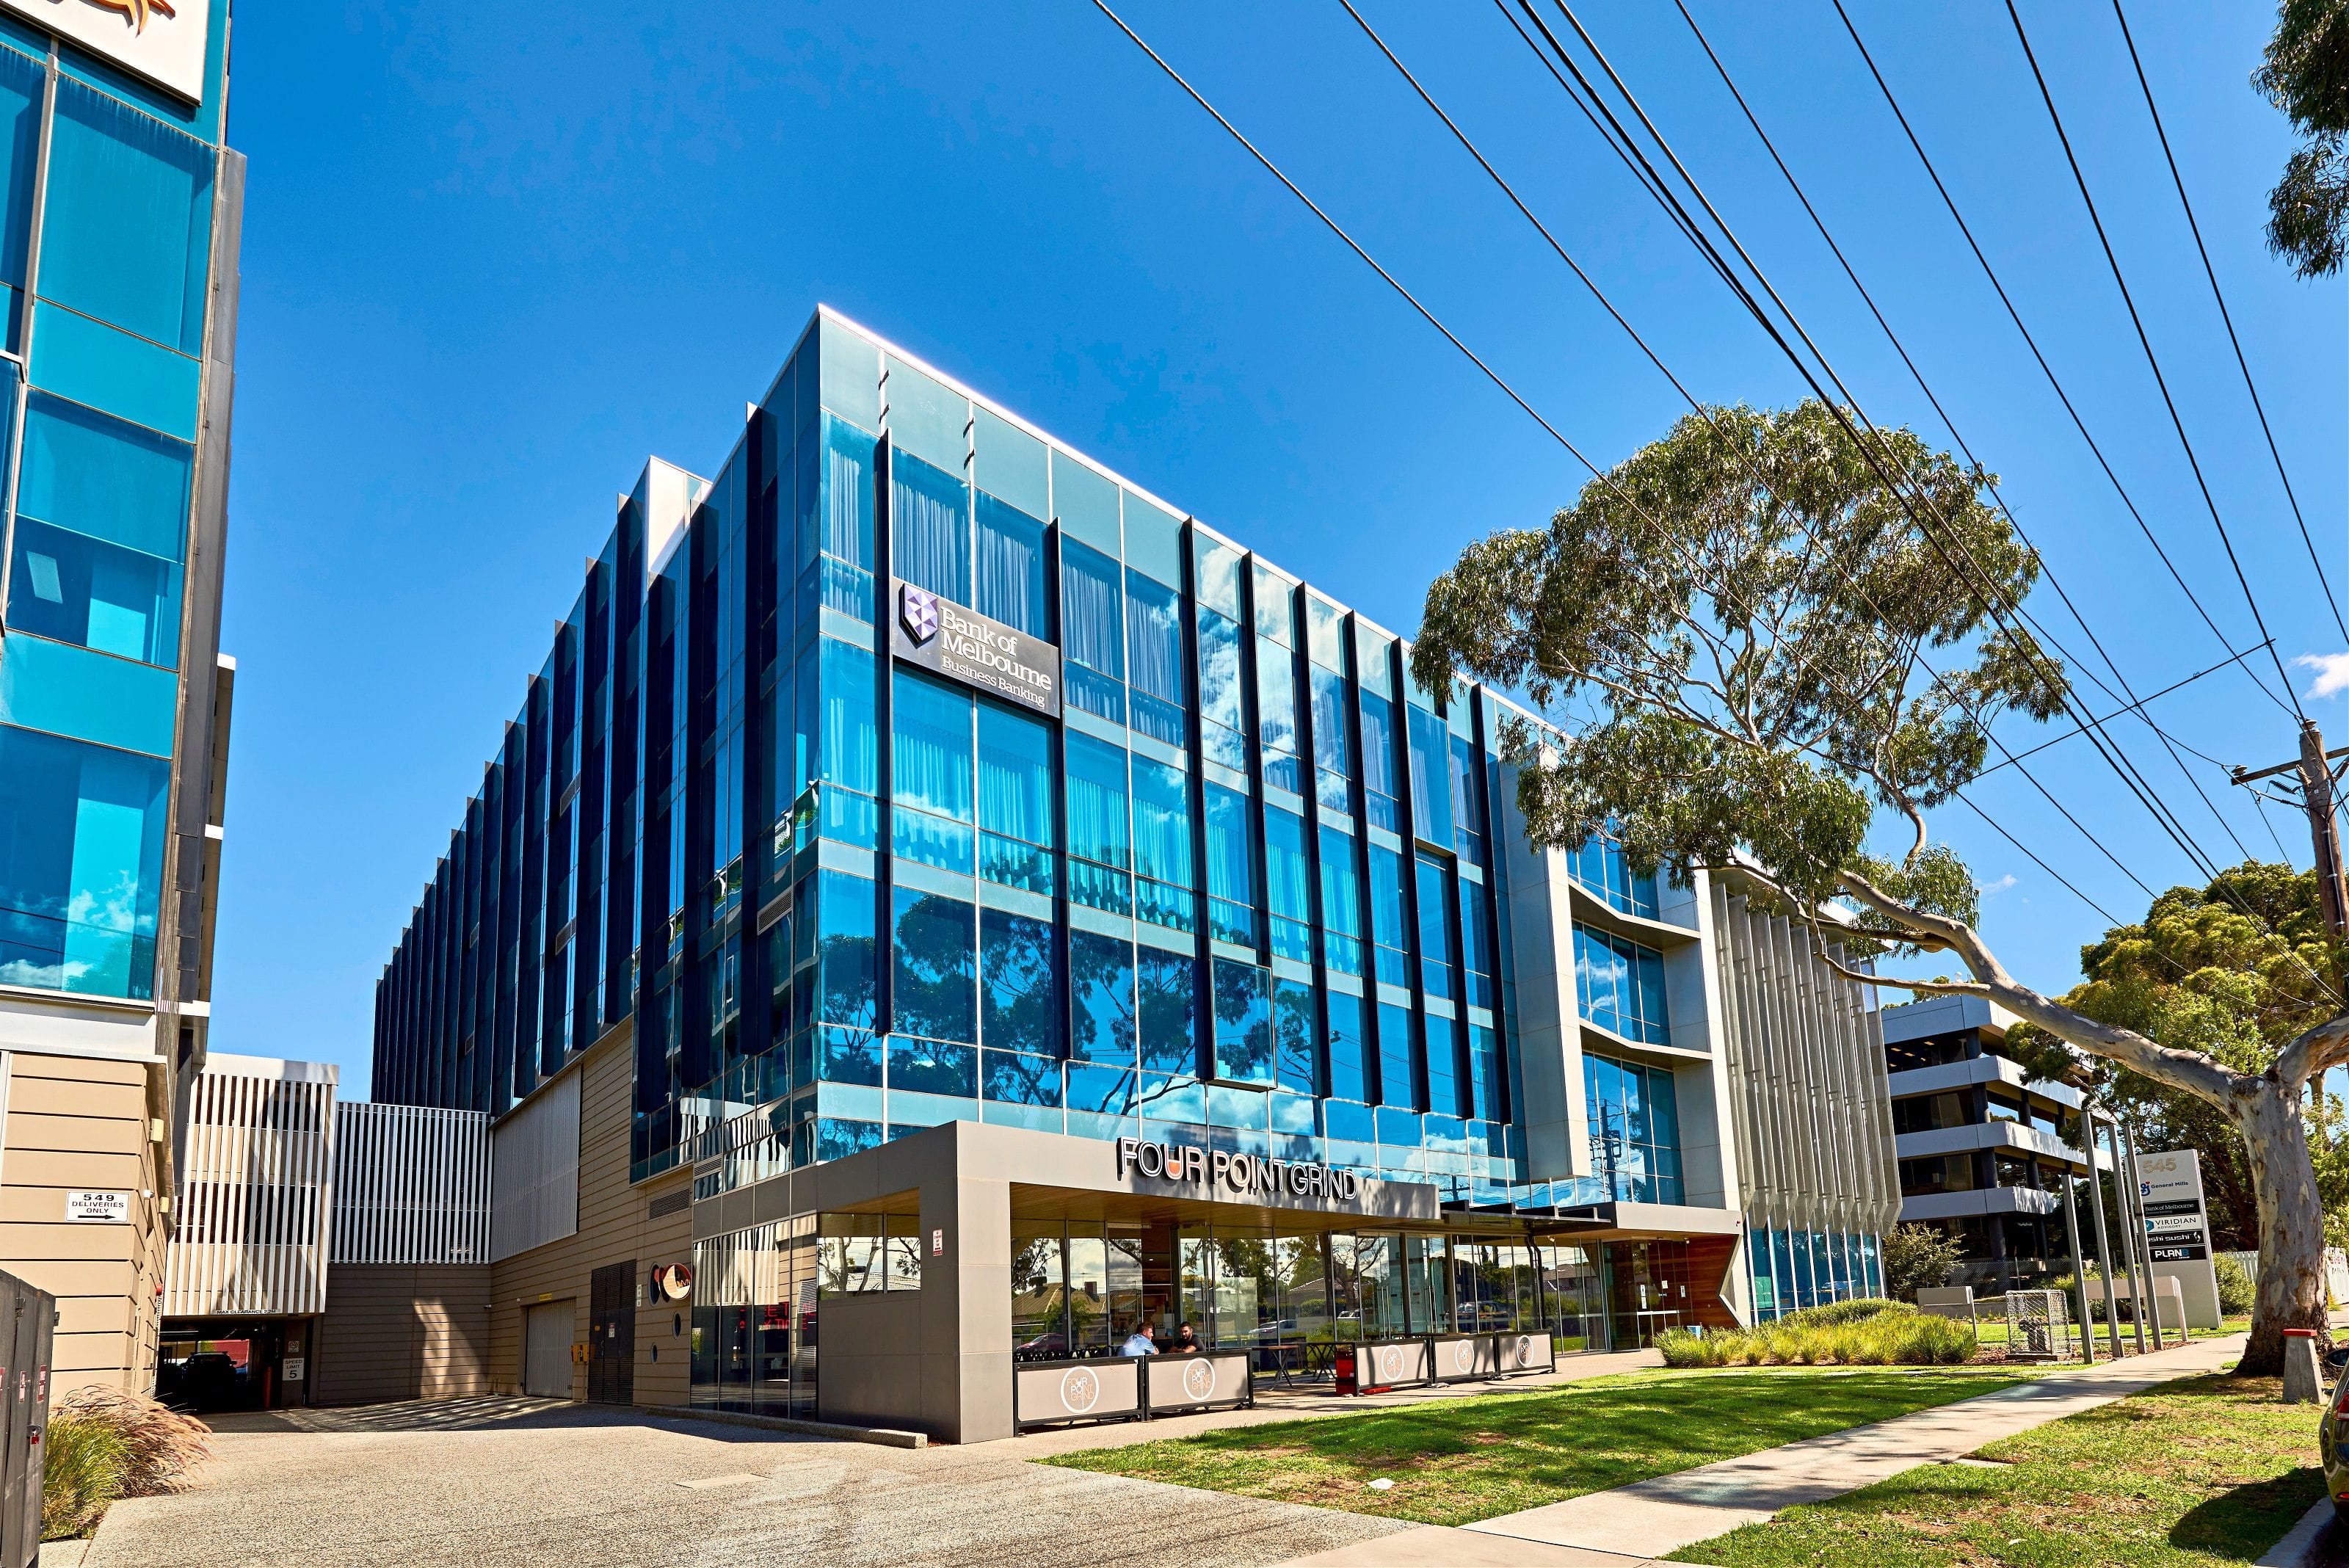 Carsales.com founders sell Melbourne office development for $60.25m